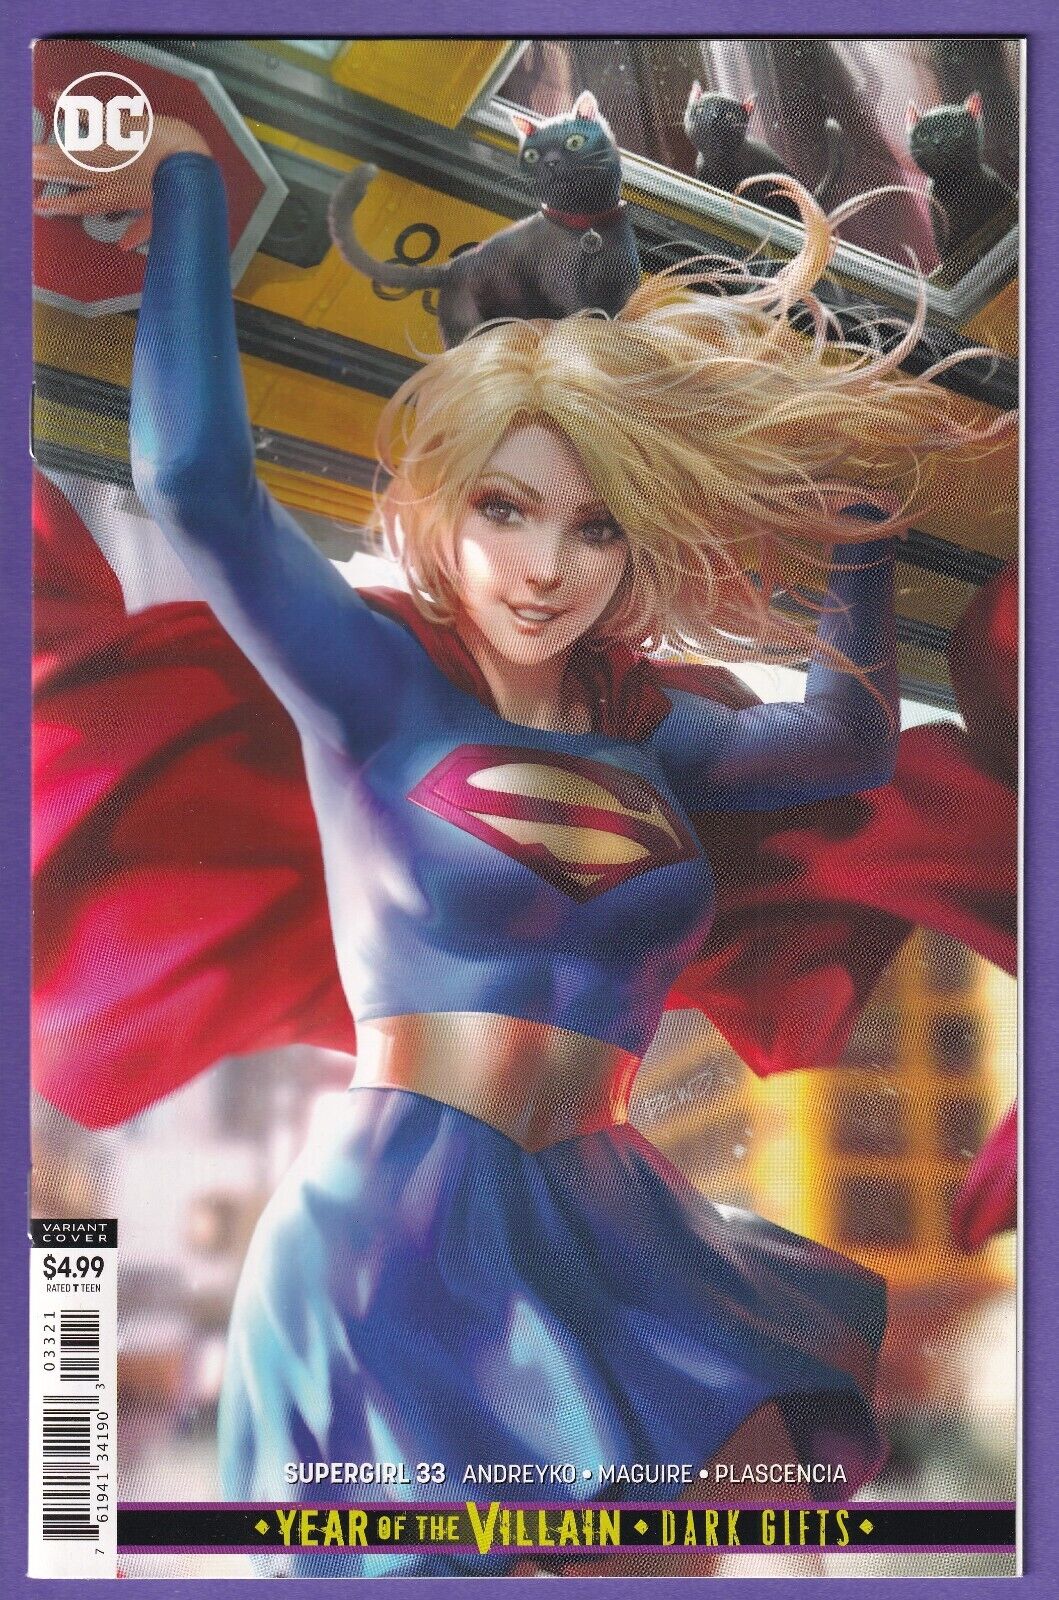 Supergirl Vol 7 #33 Cover B RECALLED Edition Brand NEW SEE PICS